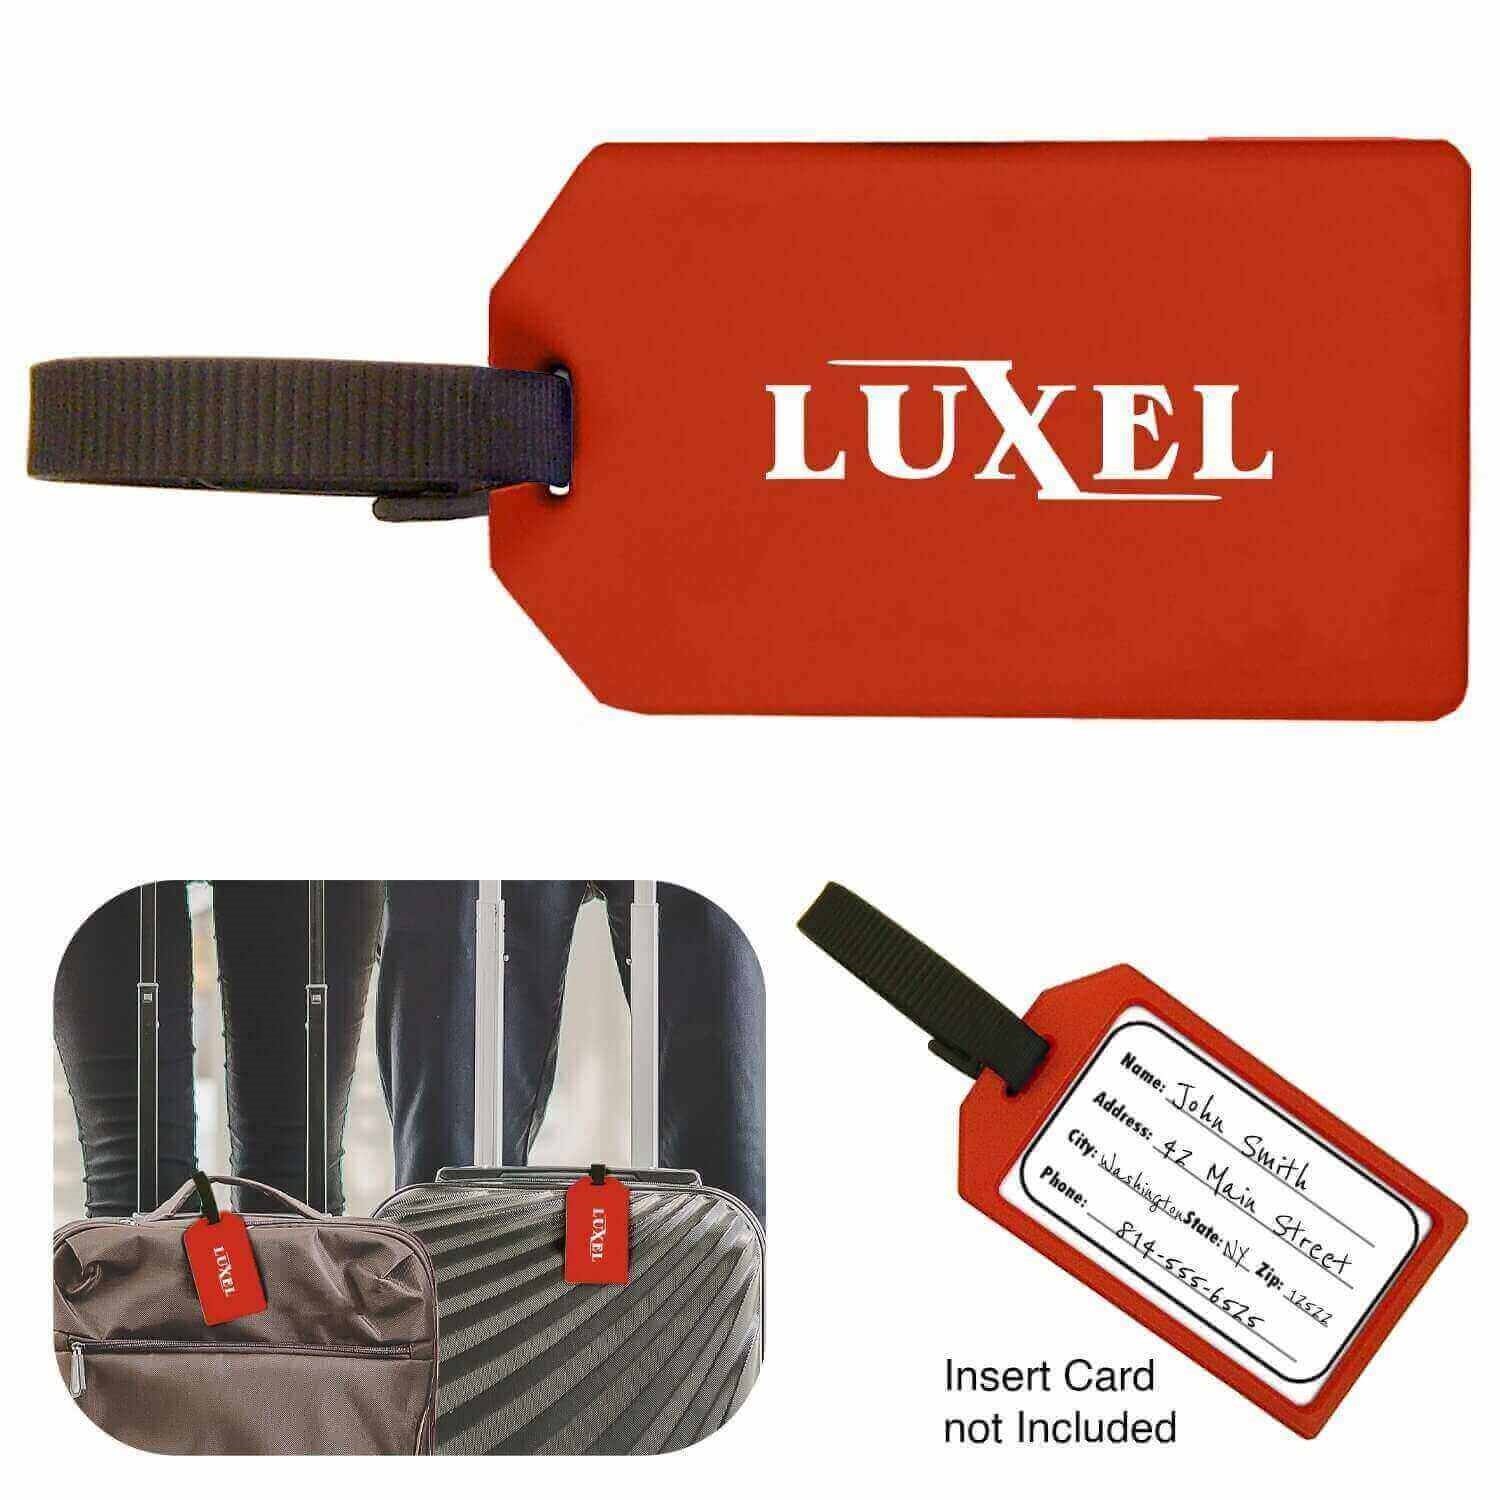 What does TSA recommend for luggage tags?